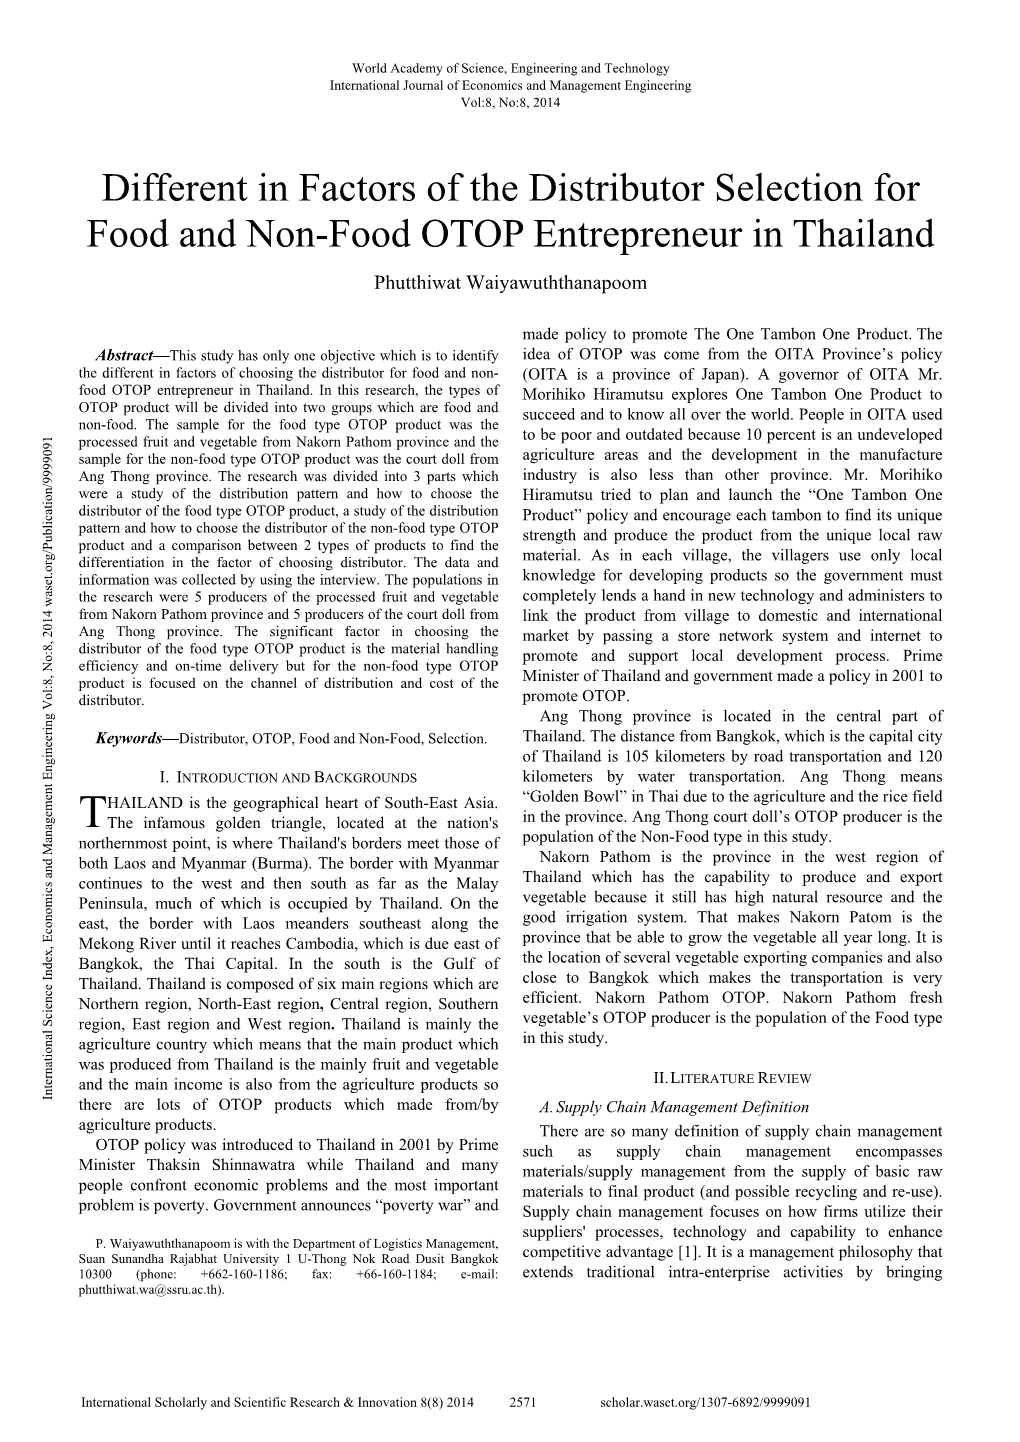 Different in Factors of the Distributor Selection for Food and Non-Food OTOP Entrepreneur in Thailand